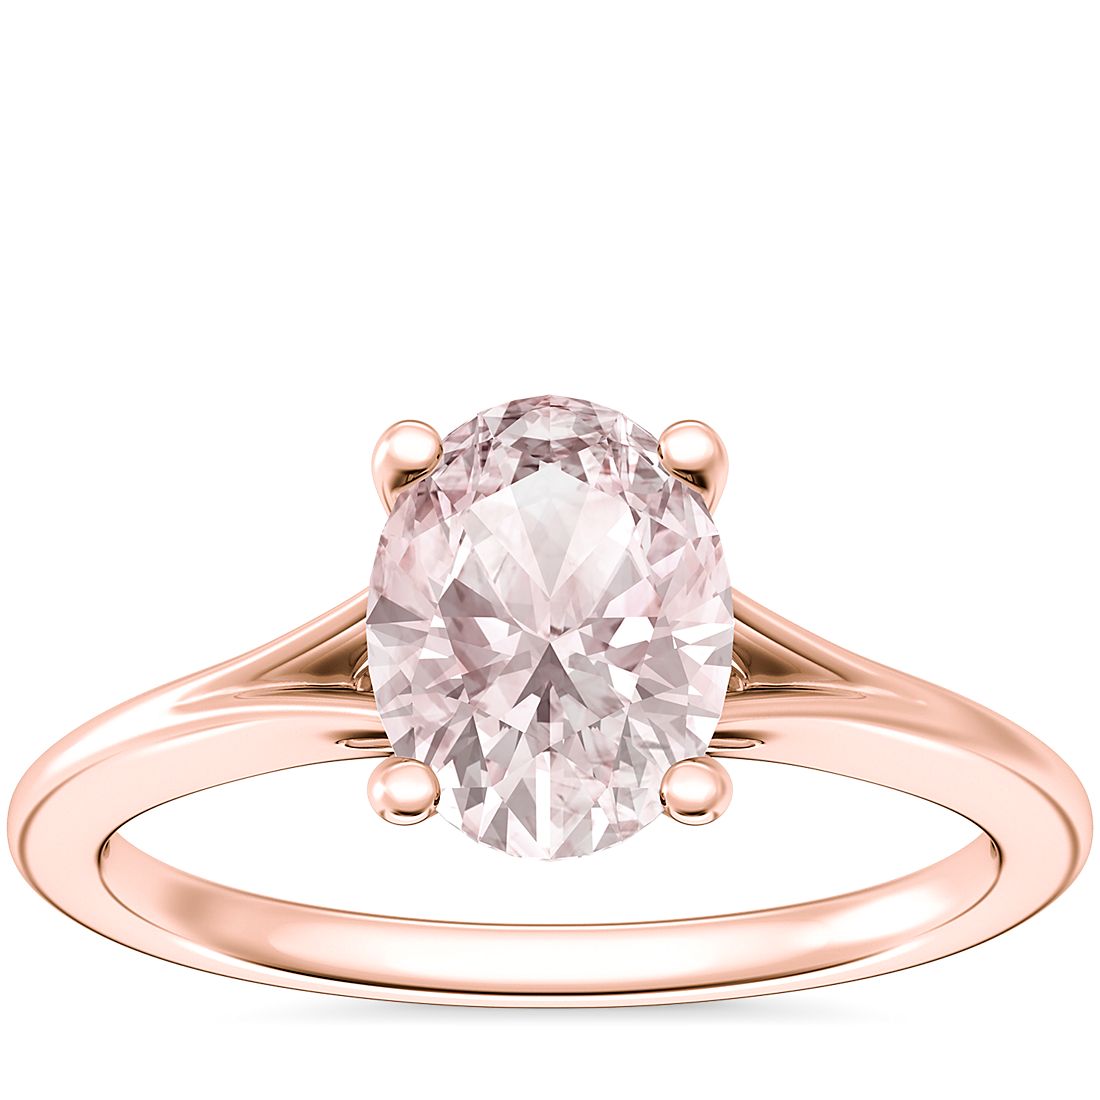 Petite Split Shank Solitaire Engagement Ring with Oval Morganite in 14k Rose Gold (8x6mm)